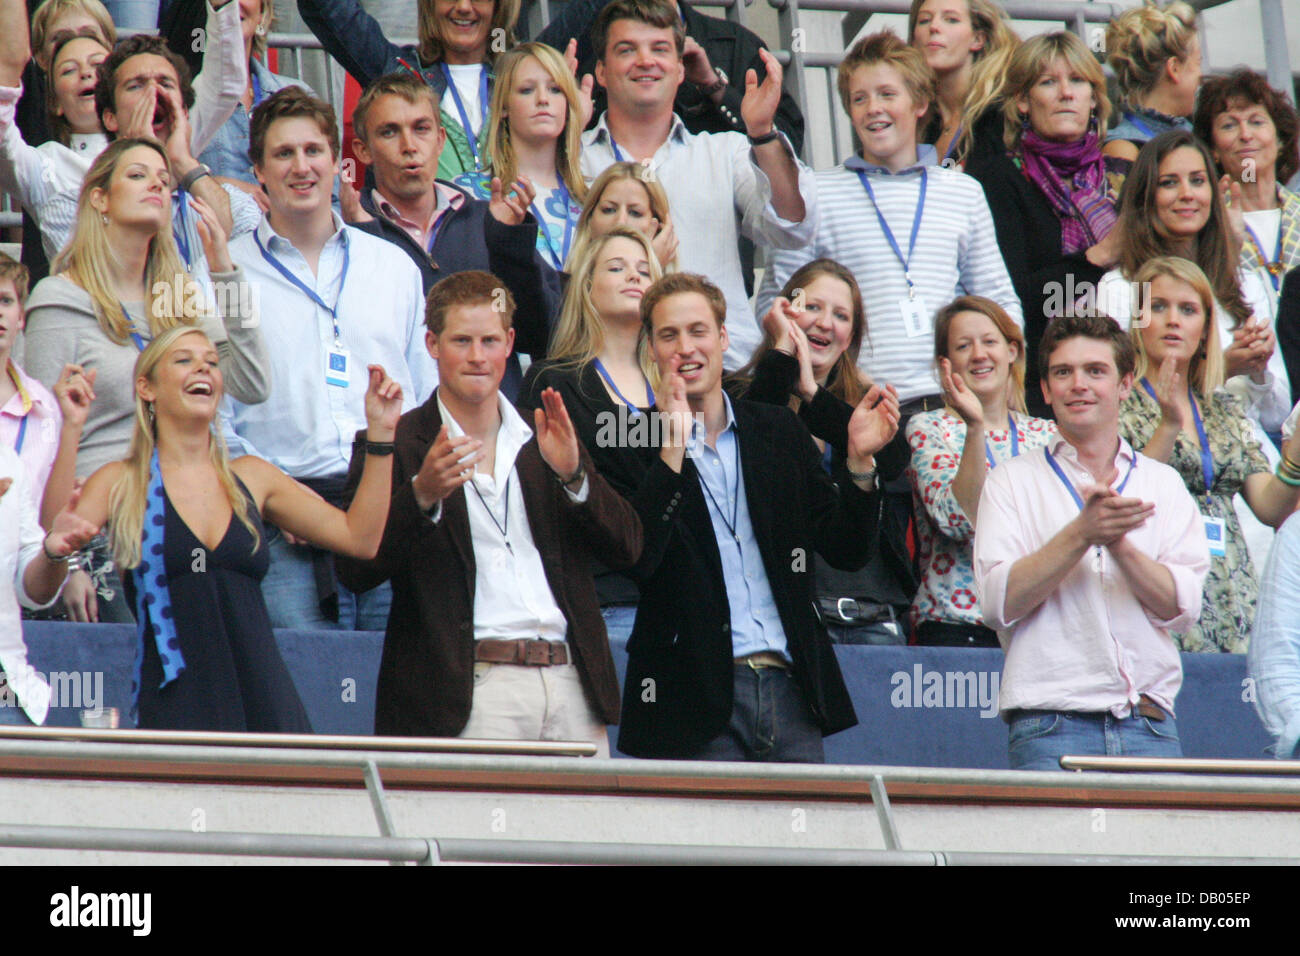 Prince William (2nd R), Prince Harry (2nd L) and his girlfriend Chelsy Davy (L) seen in the crowd at the charity concert in memory of Diana, Princess of Wales on what would have been her 46th birthday at Wembley Stadium, London, 1 July 2007. Photo: Hubert Boesl Stock Photo